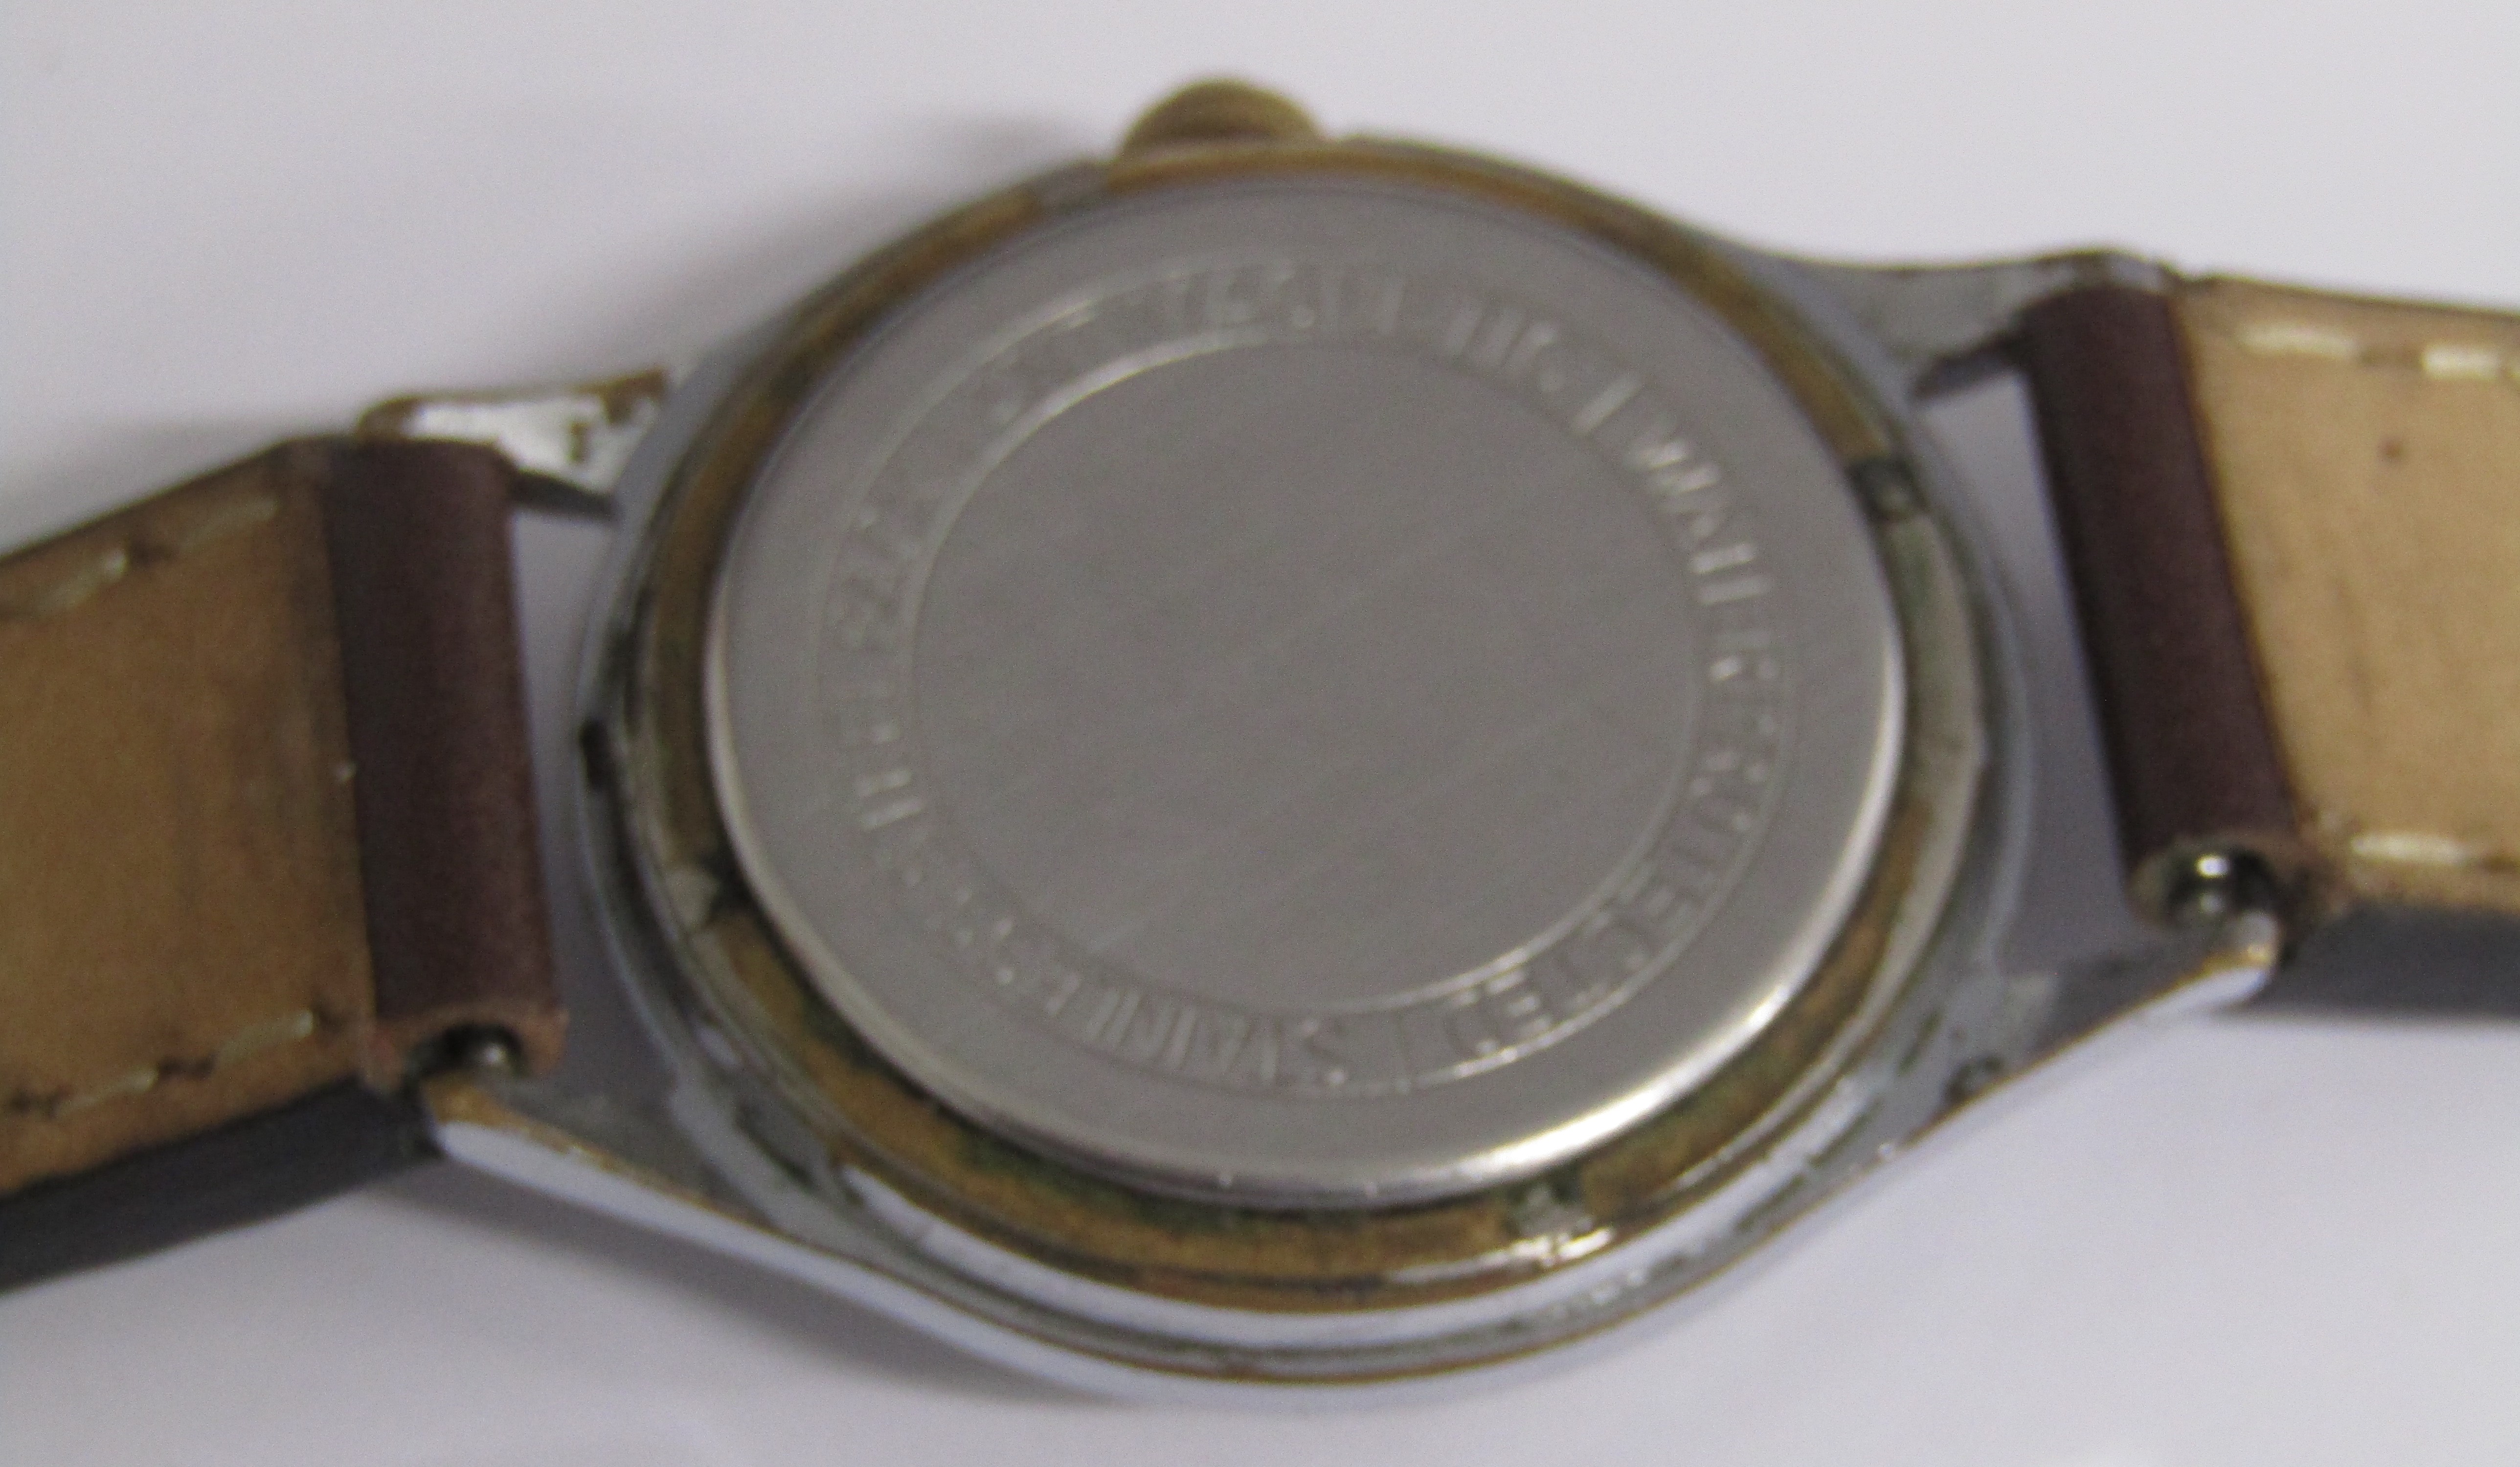 2 1950's Kienzle antimagnetic watches - one marked Foreign and the other Made in Germany with case - Image 4 of 9